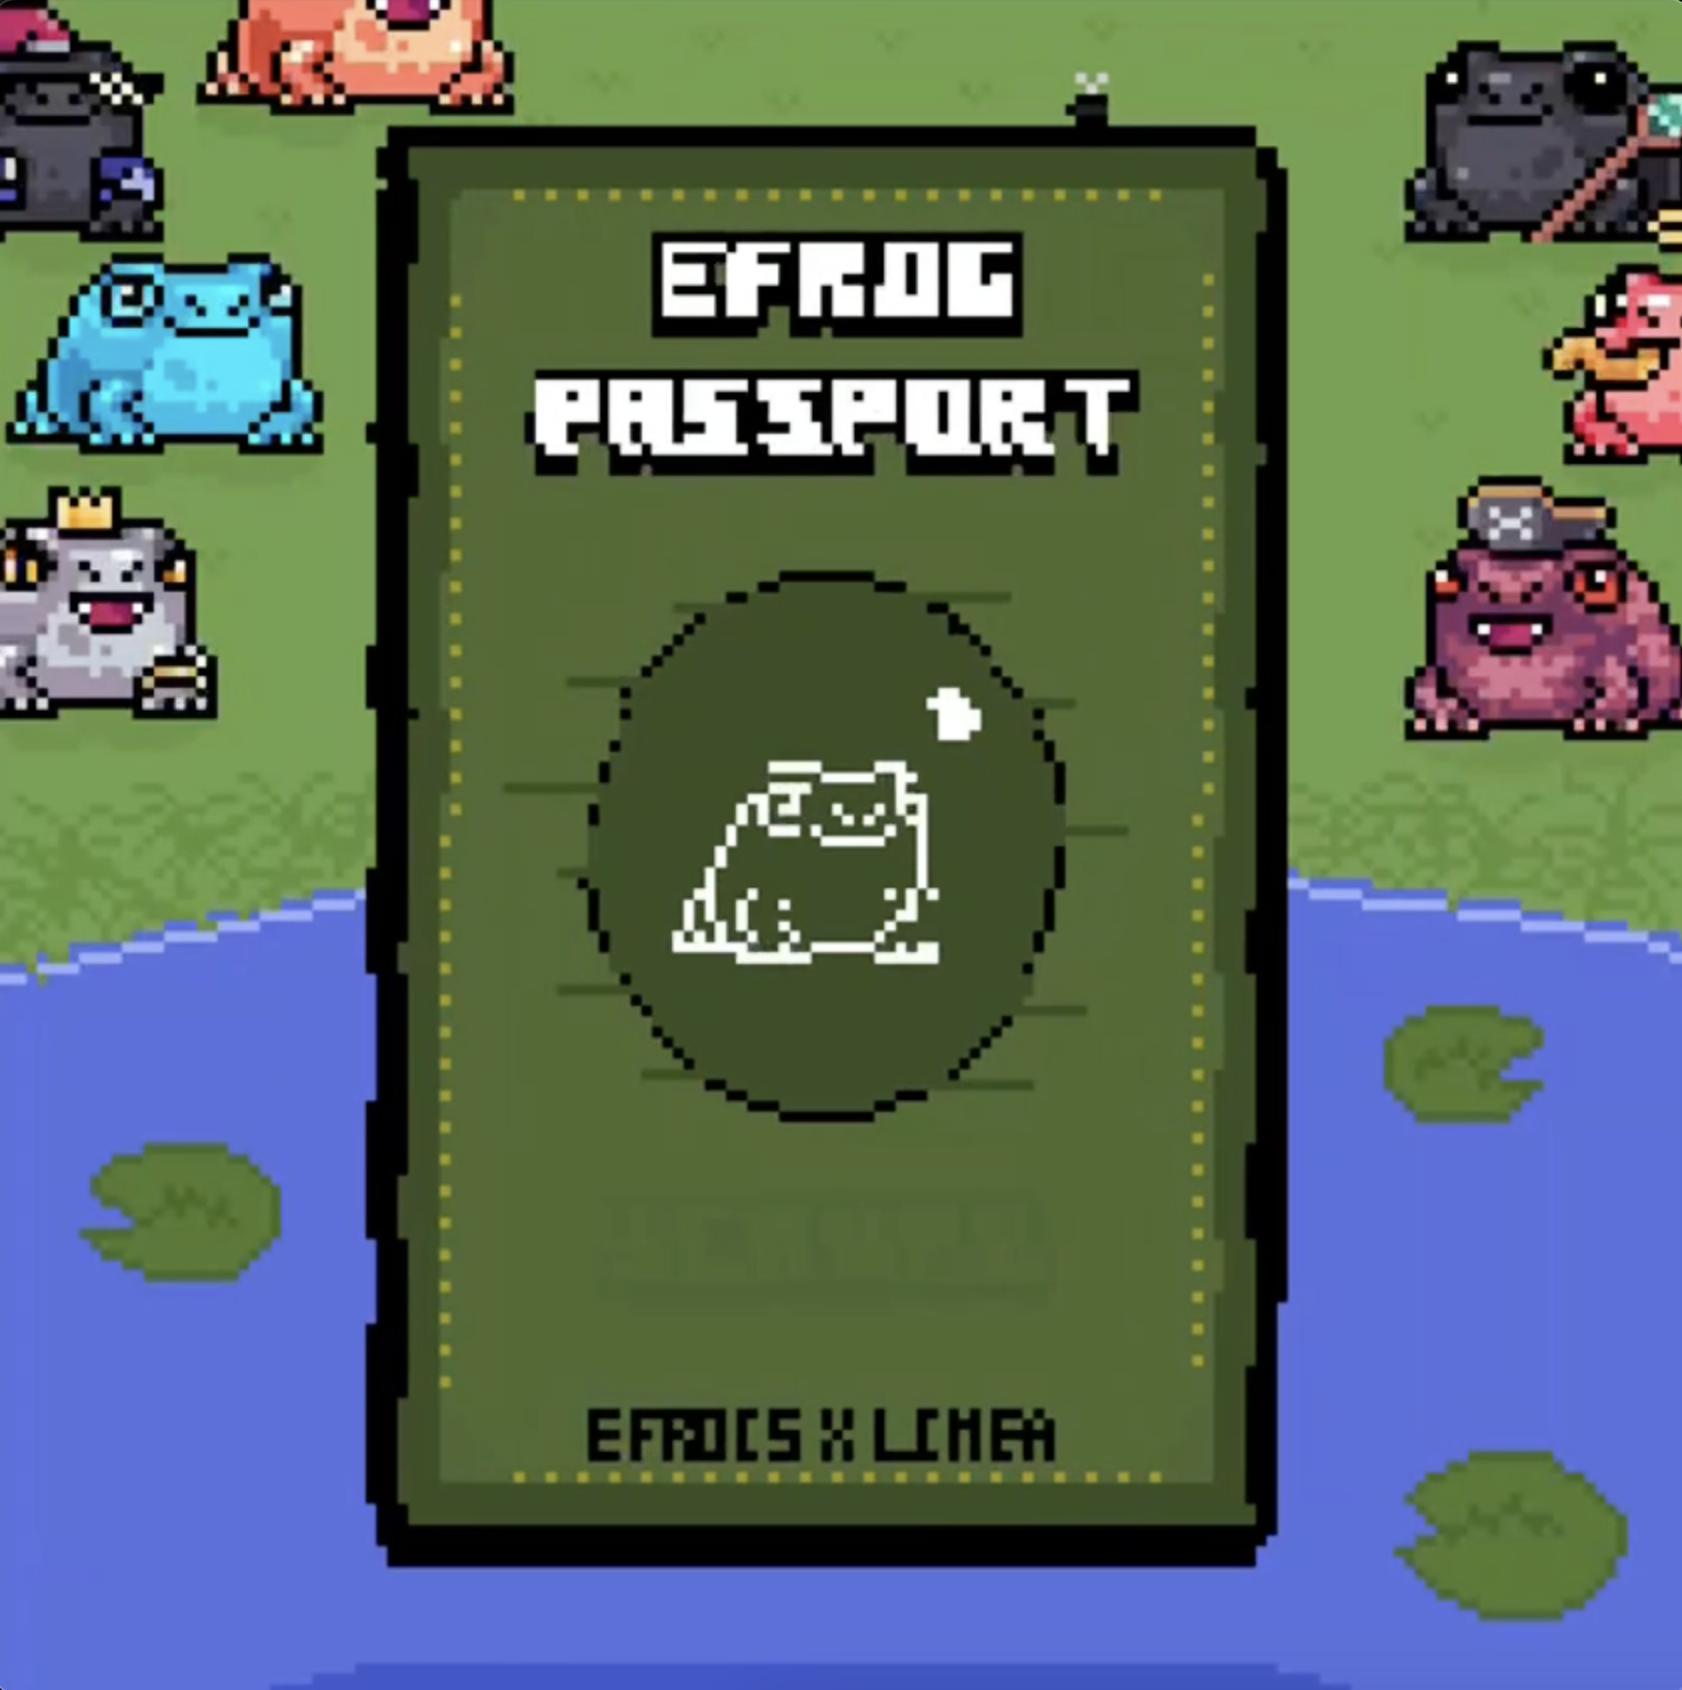 Passport from Efrogs, Linea’s OG PFP collection. The passport certifies you as a citizen of the Linea Pond and grants special access to the Ethereum Frog CROAK chamber. Photo: Efrogs. Courtesy: Efrogs.